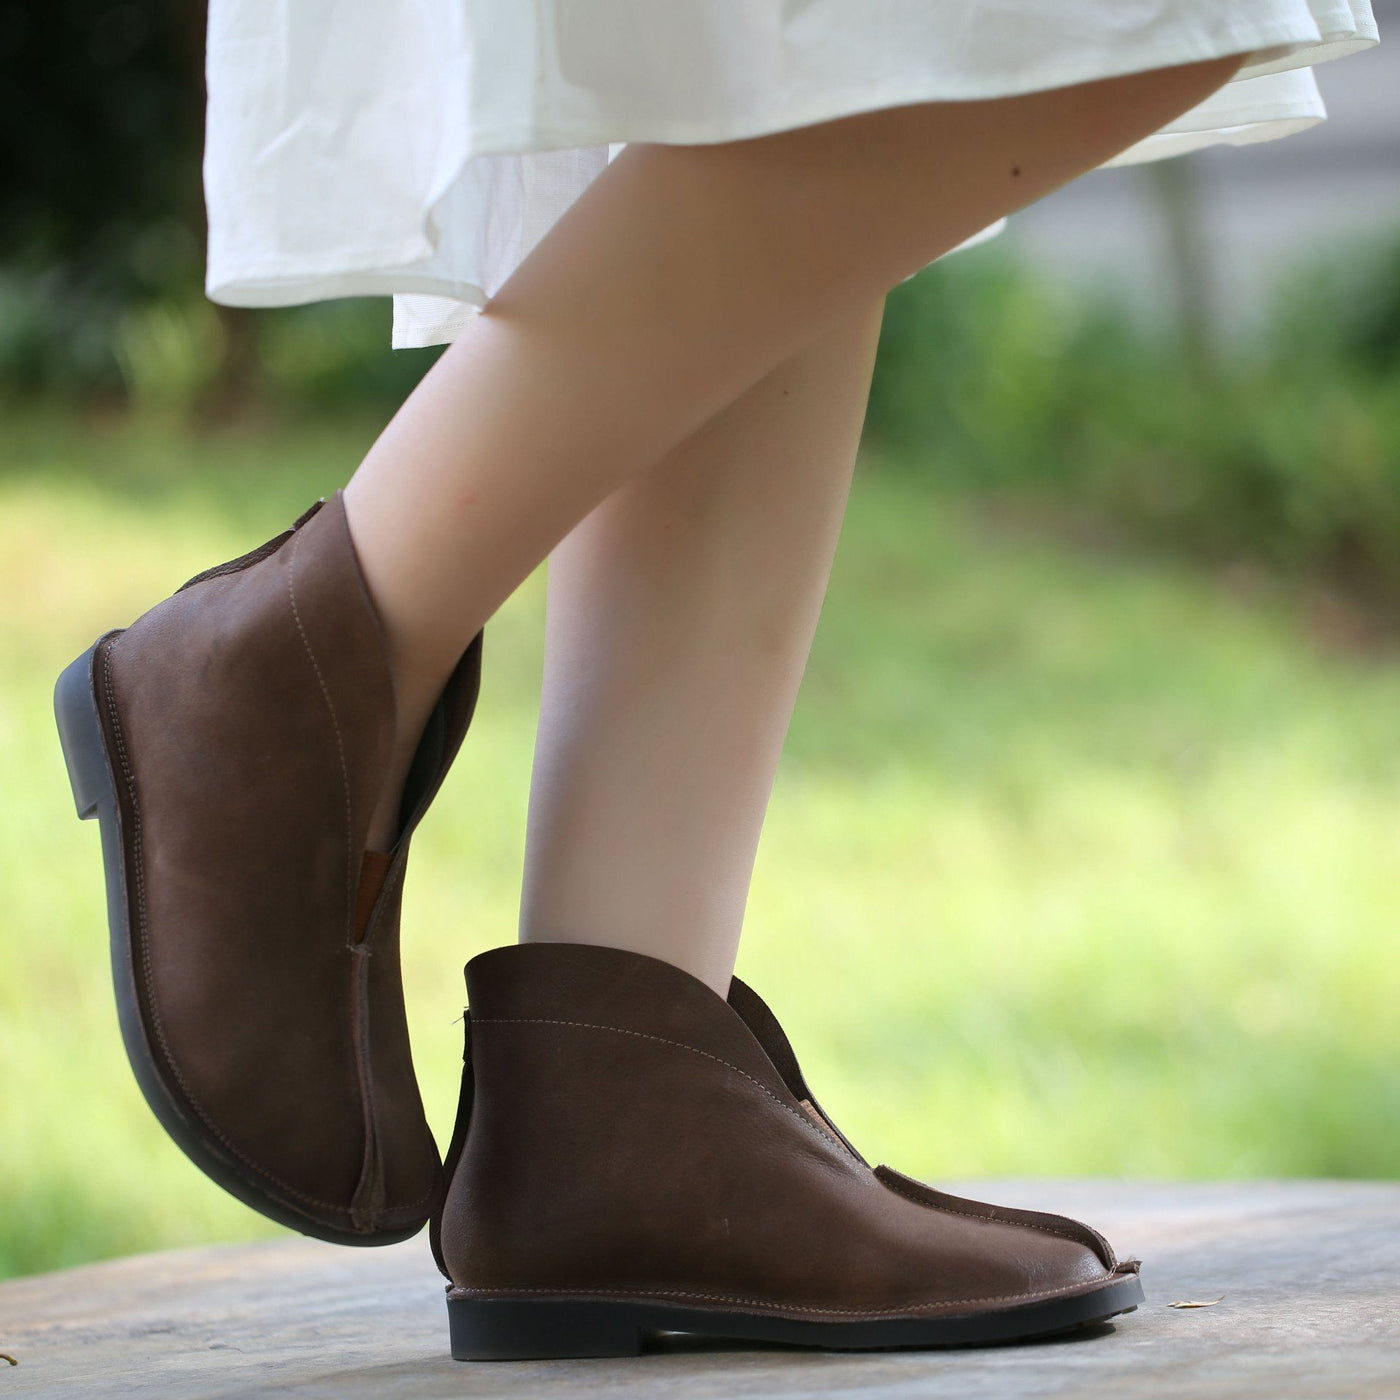 Retro Leather Women's Comfortable Shoes April 2021 New-Arrival 35 Coffee 